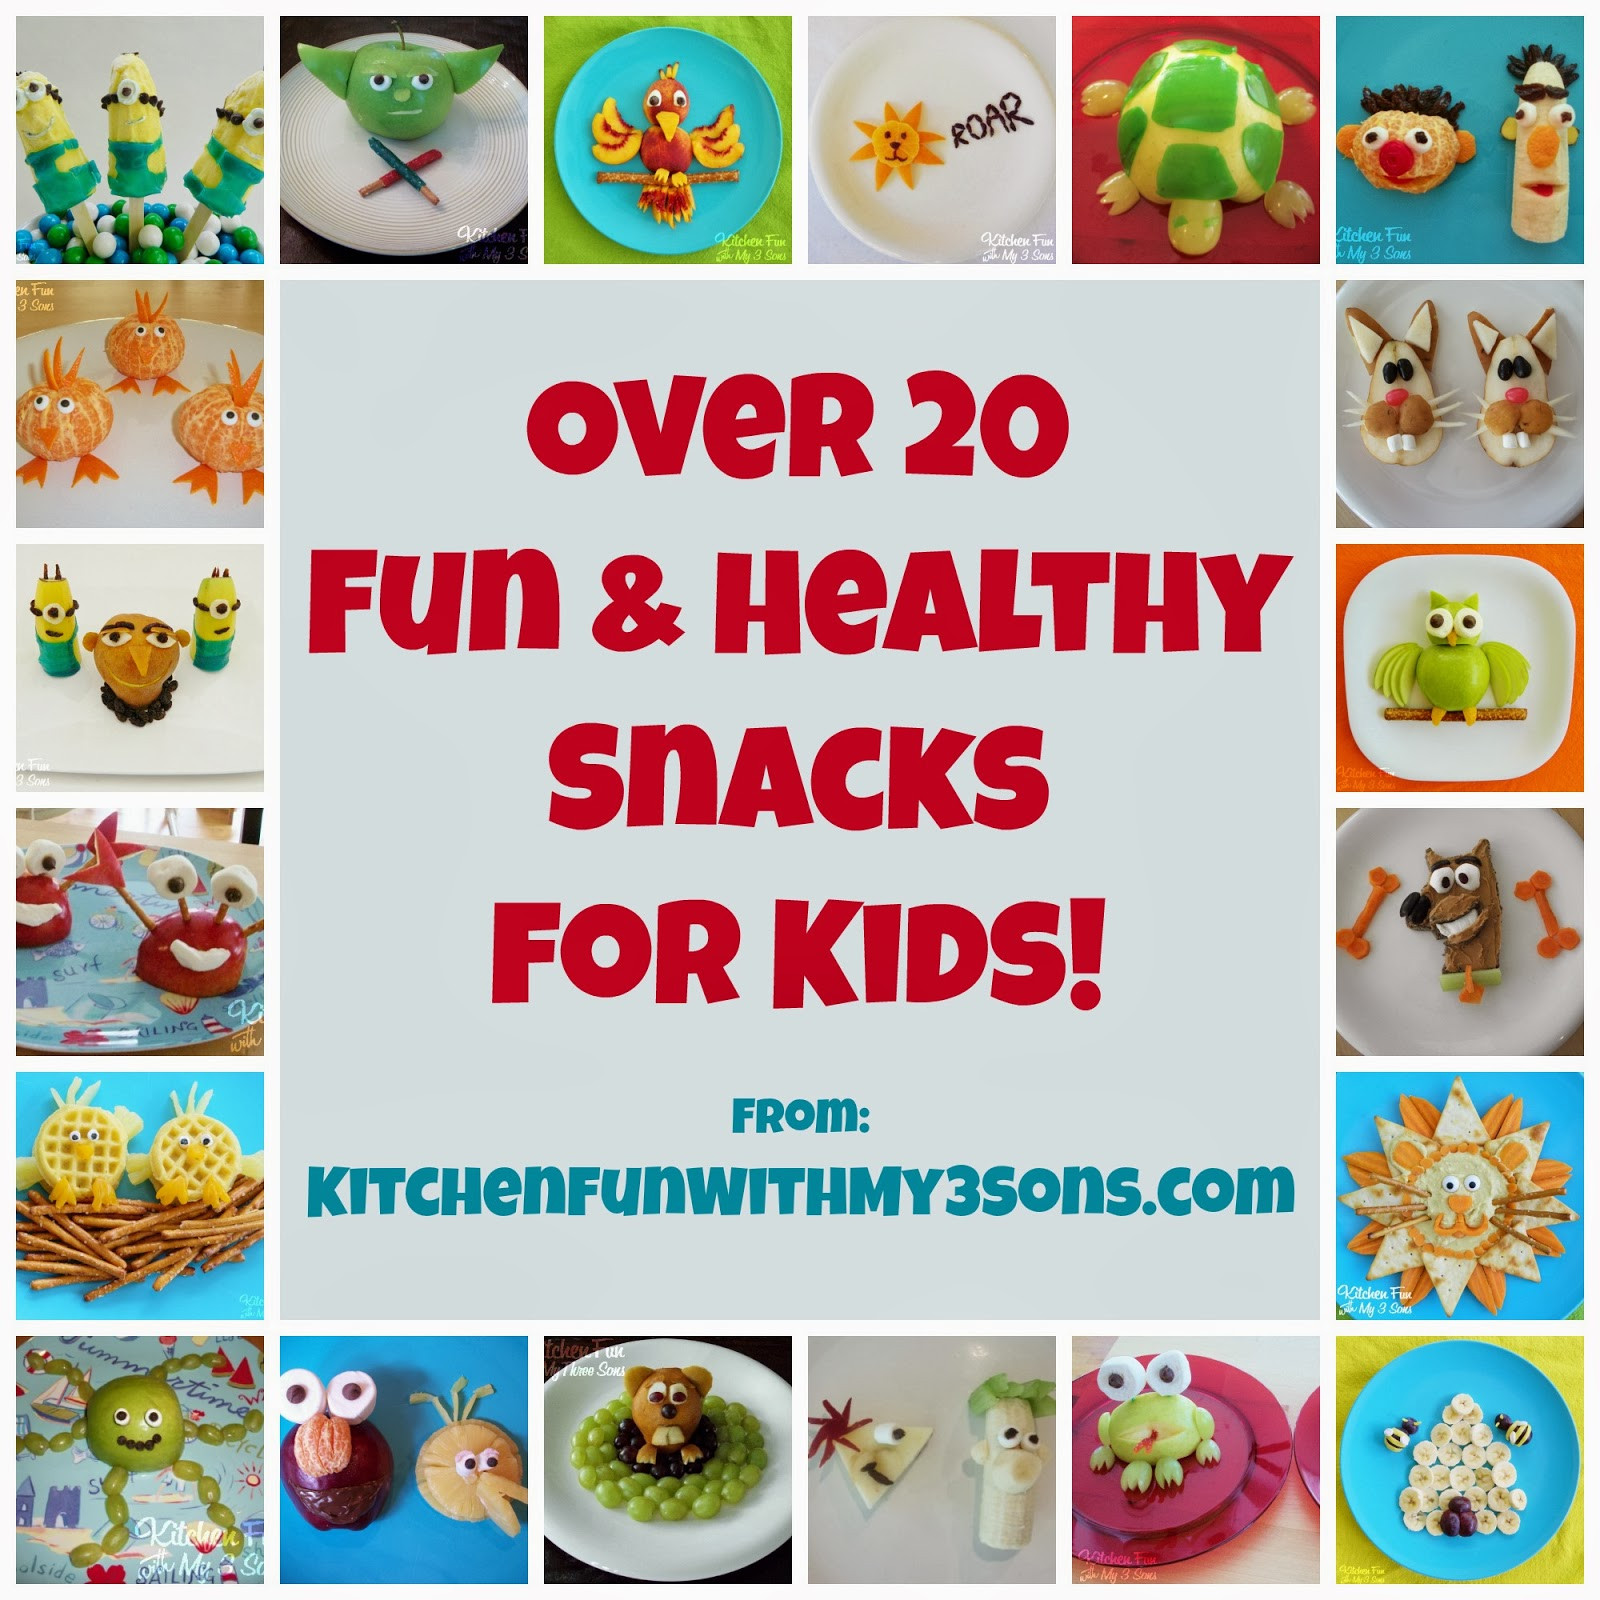 Healthy Fun Snacks For Kids
 Over 20 of our Fun & Healthy Snacks for Kids Kitchen